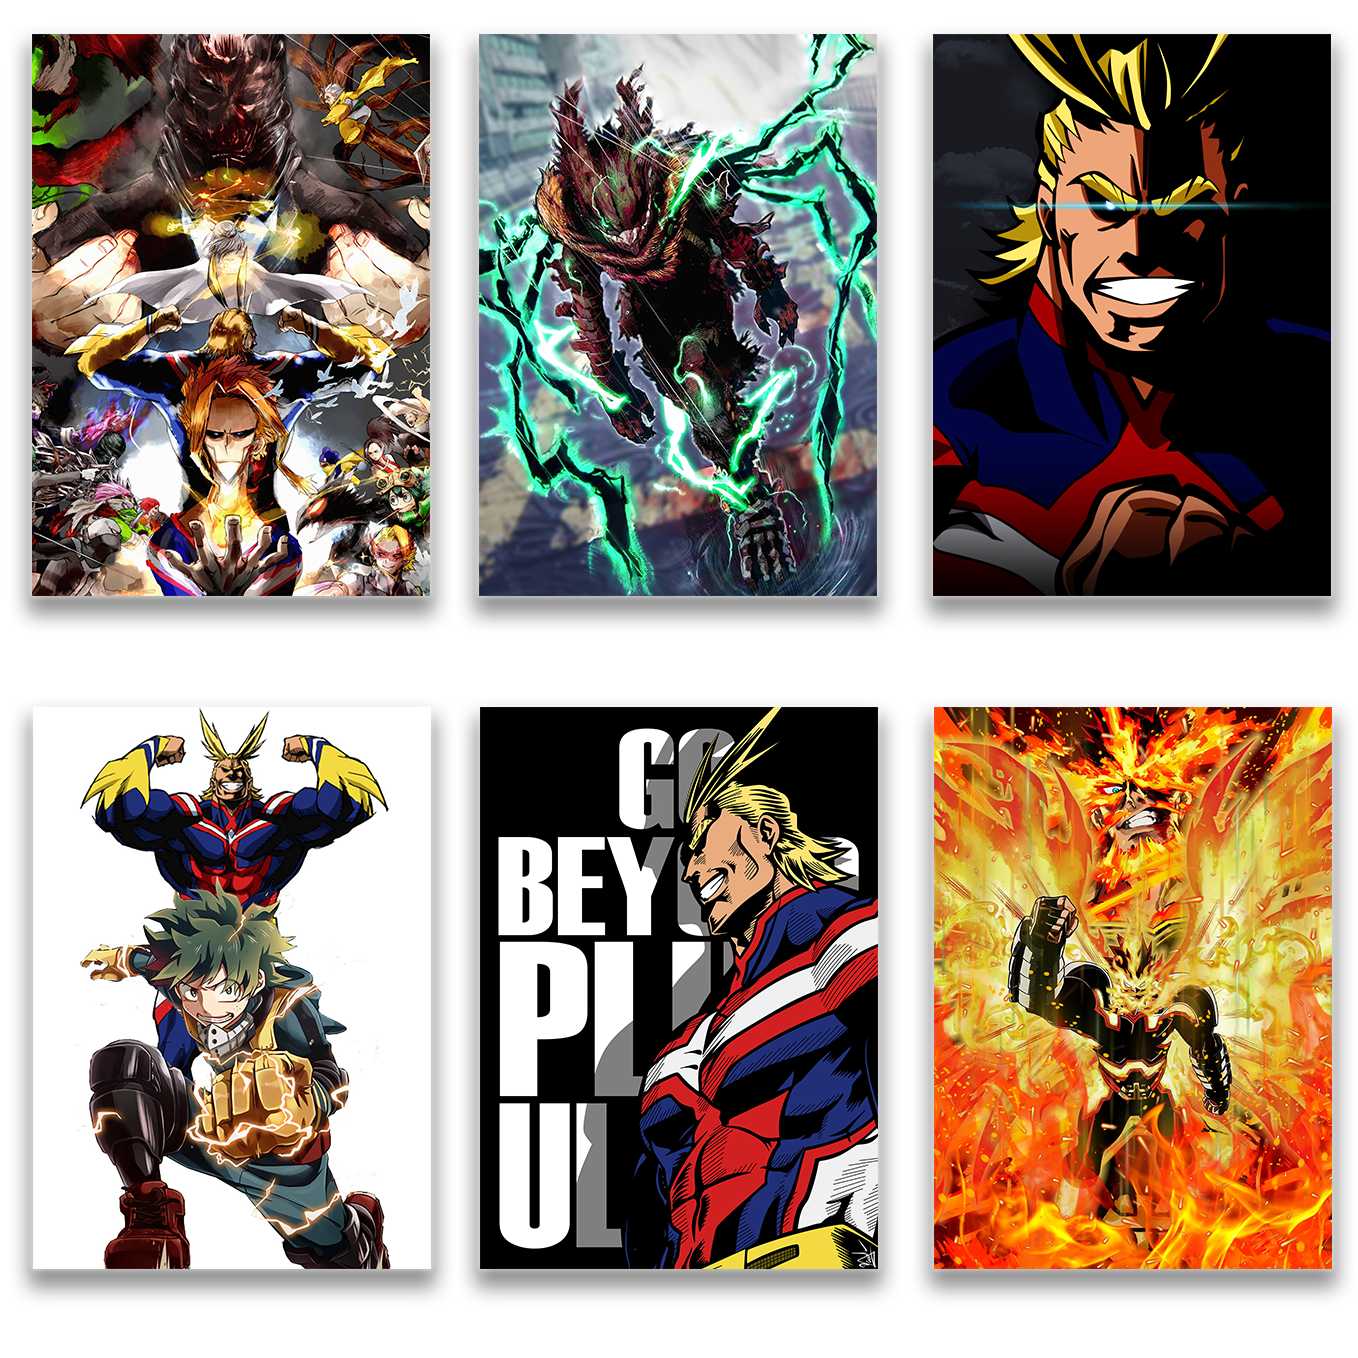 Poster My Hero Academia All Characters 53x158cm